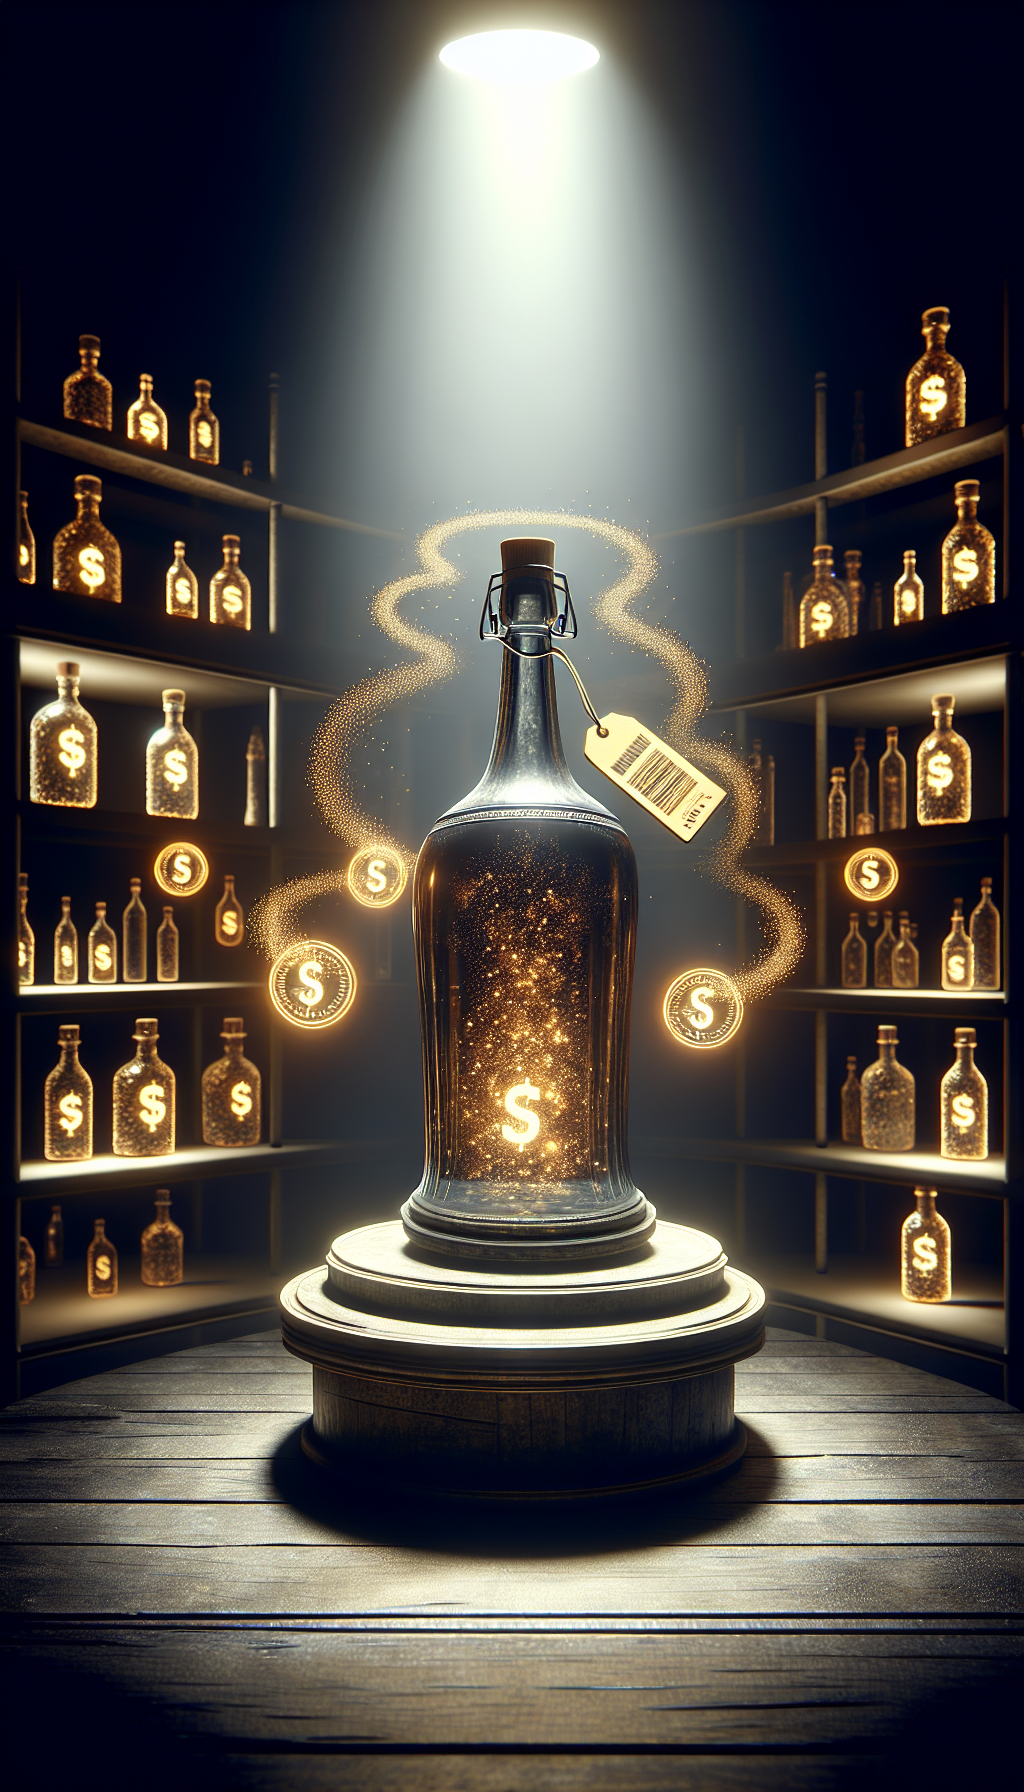 An antique glass bottle stands on a pedestal, bathed in a spotlight against a backdrop of shadowy shelves filled with indistinct bottles. A price tag hangs off the bottleneck, displaying an exorbitant figure that gradually increases in size as digital scarcity icons (e.g., a low quantity alert) orbit the bottle like shimmering, golden dust.